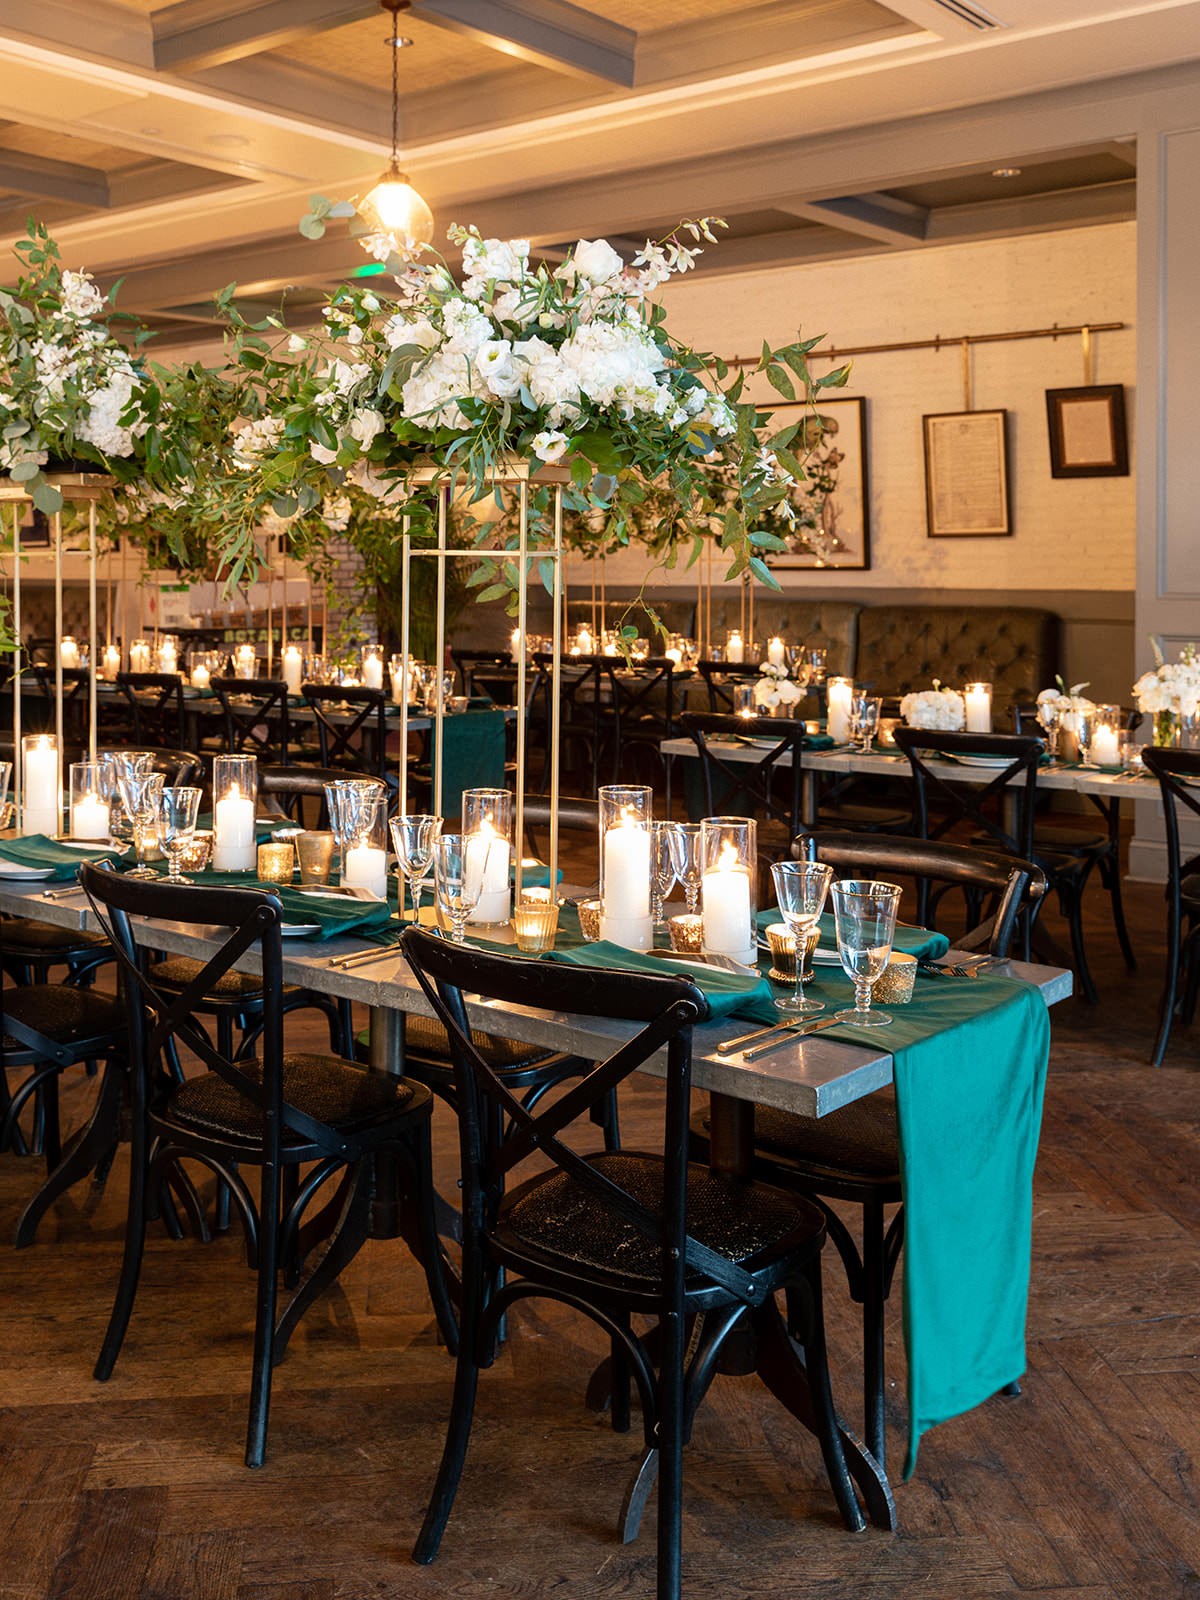 Classic Elegant Wedding Reception Decor, Long Feasting Tables, Black Cross Back Chairs, Green Linen Table Runners, Candles, Tall Gold Stands with Lush White Flowers and Greenery | Tampa Bay Wedding Florist Botanica | Wedding Venue Oxford Exchange | A Chair Affair Rentals